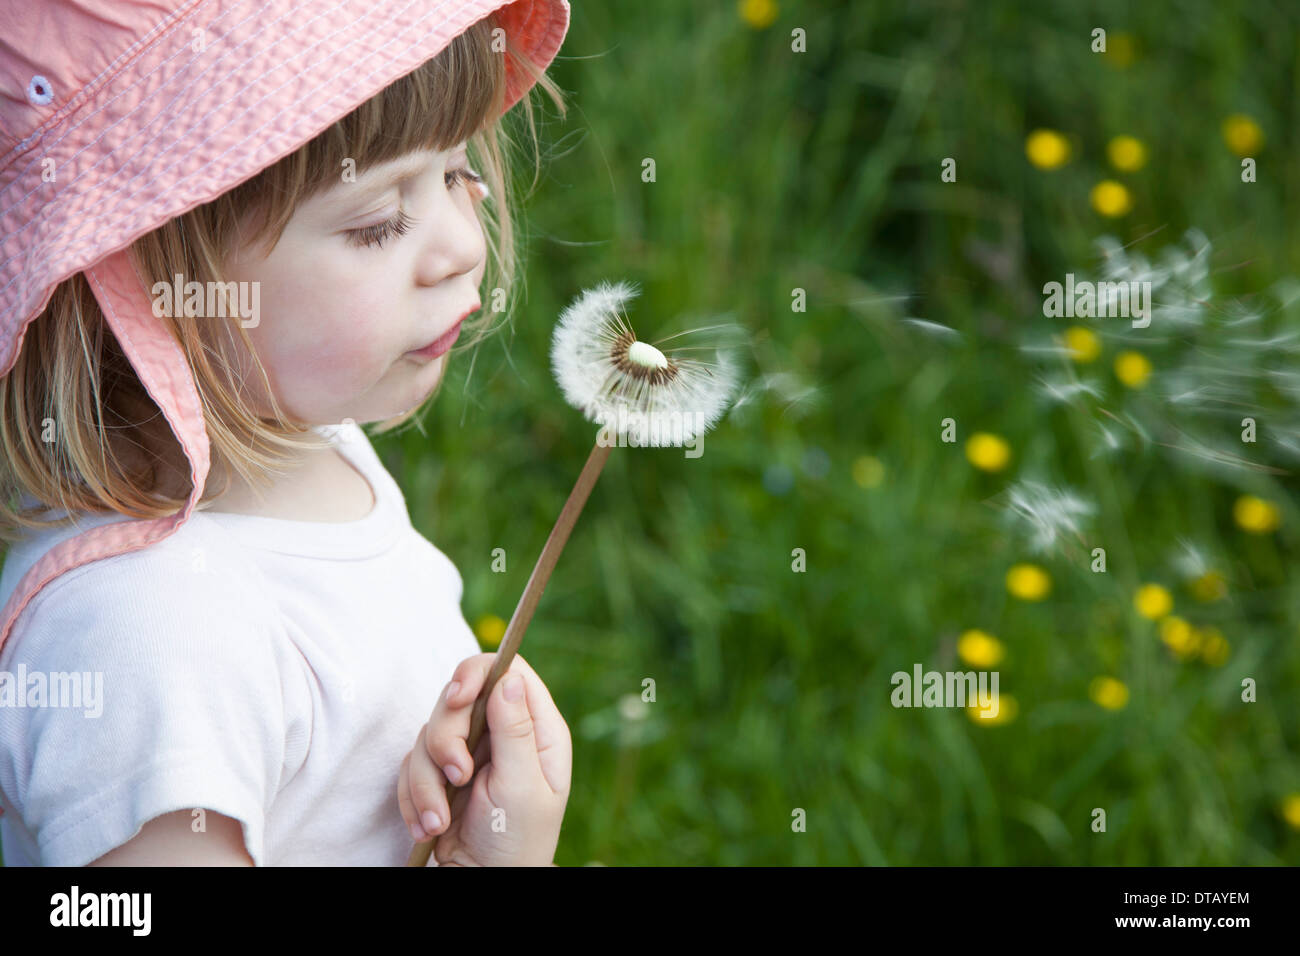 Girl blowing dandelion flower, close-up Stock Photo